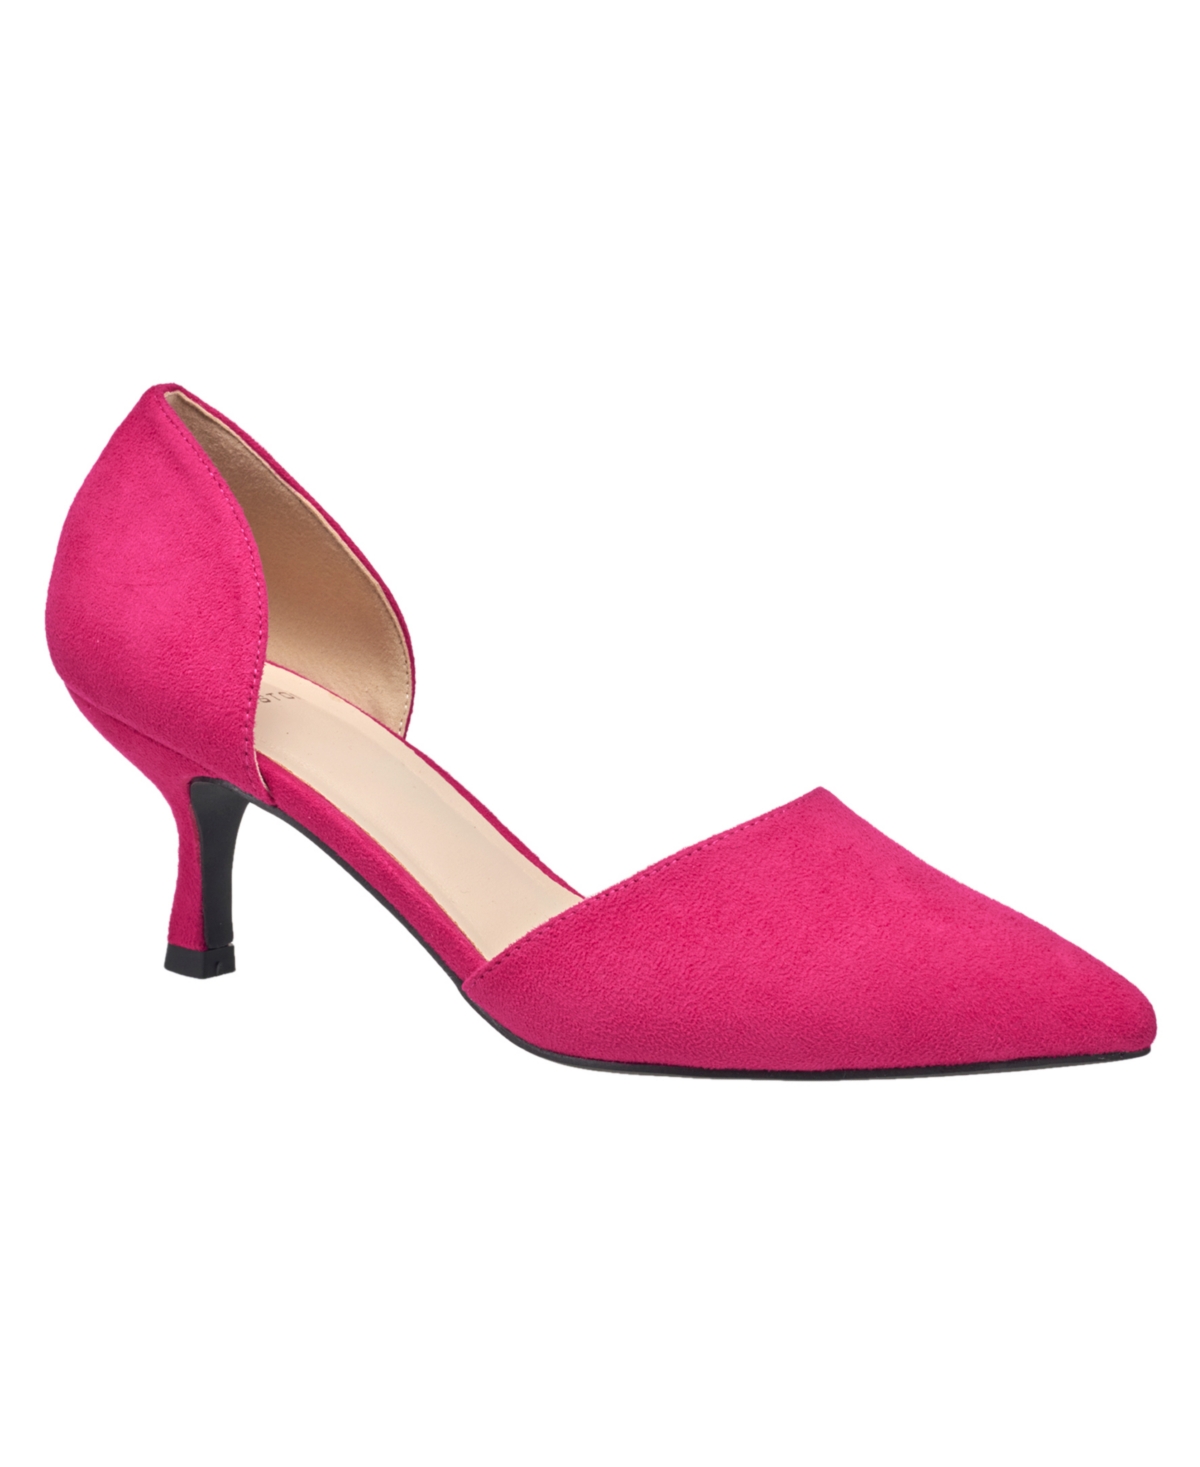 Women's Bali Pointed Pumps - Pink